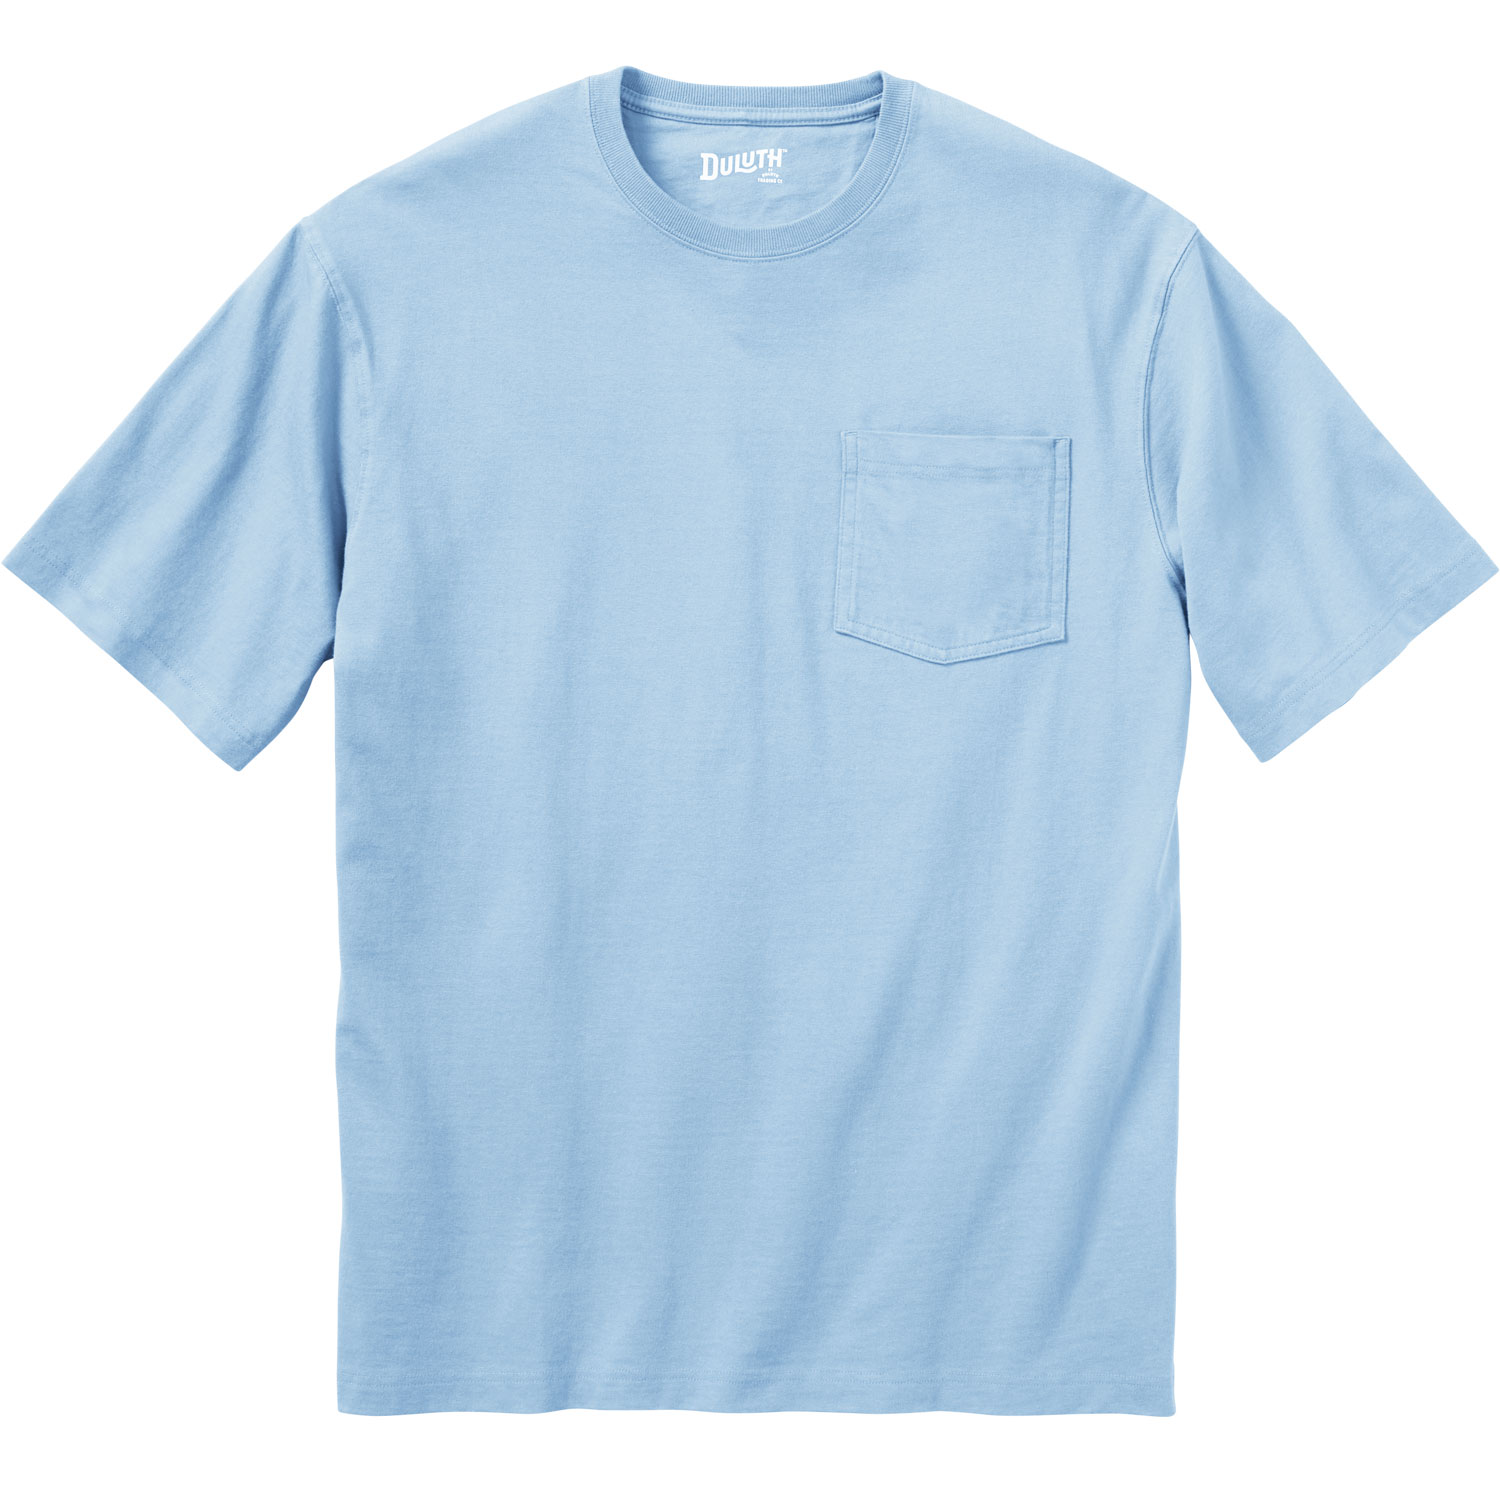 Men's Longtail T Short Sleeve Shirt With Pocket | Duluth Trading Company